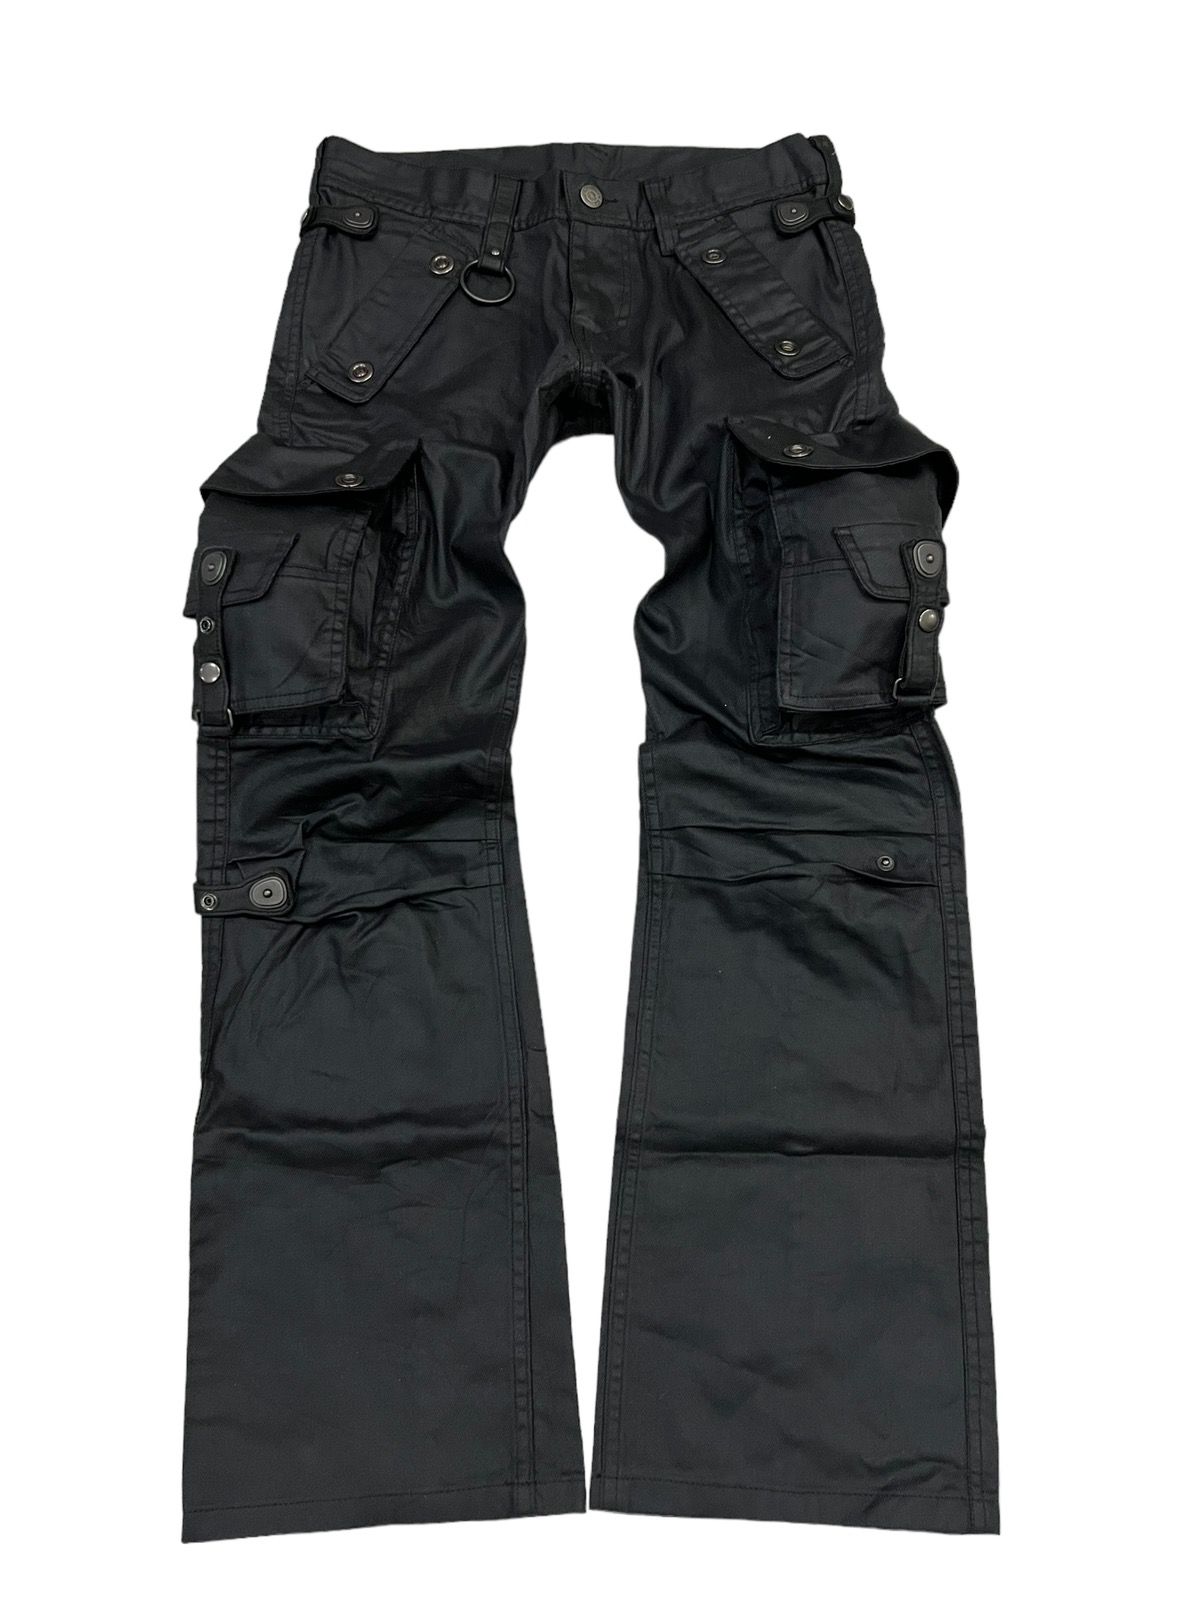 Archival Clothing Tornado Mart Wax Gas Mask Cargo Pants | Grailed